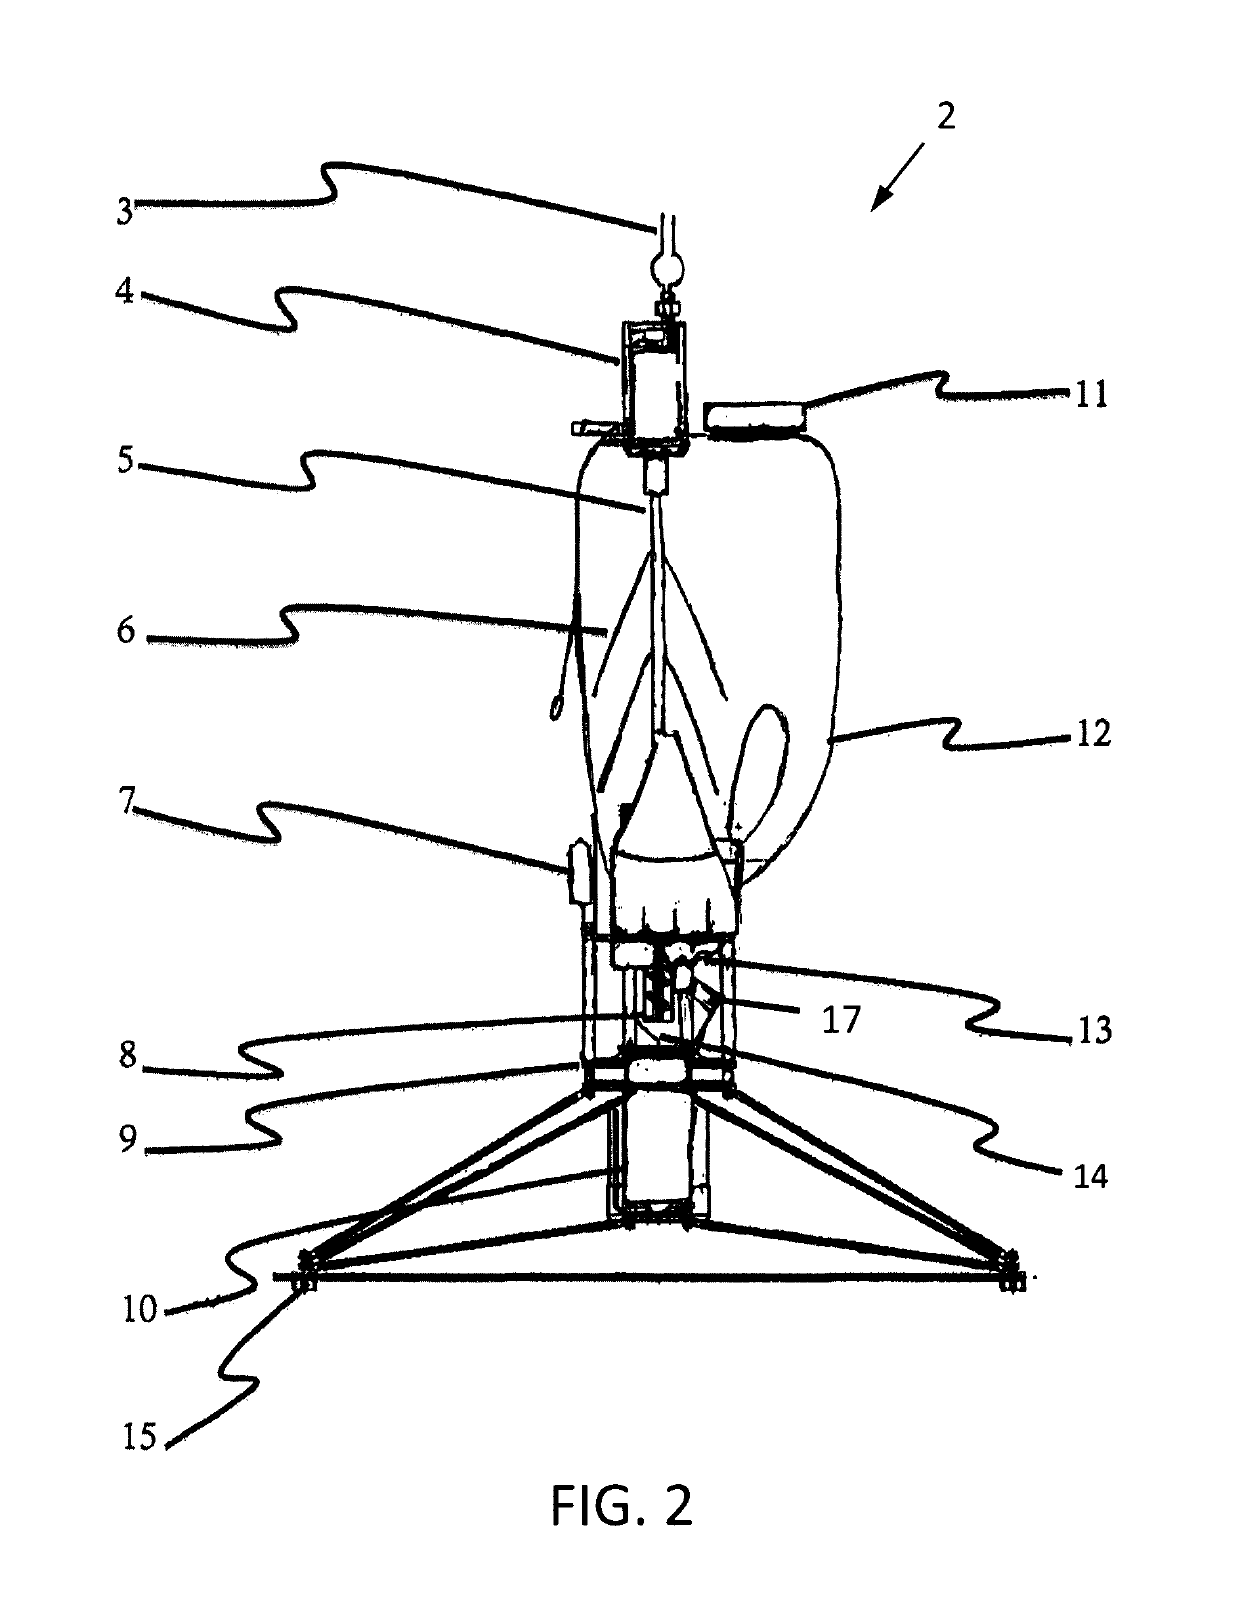 Apparatus and method for delivering a dry material with an unmanned aerial vehicle